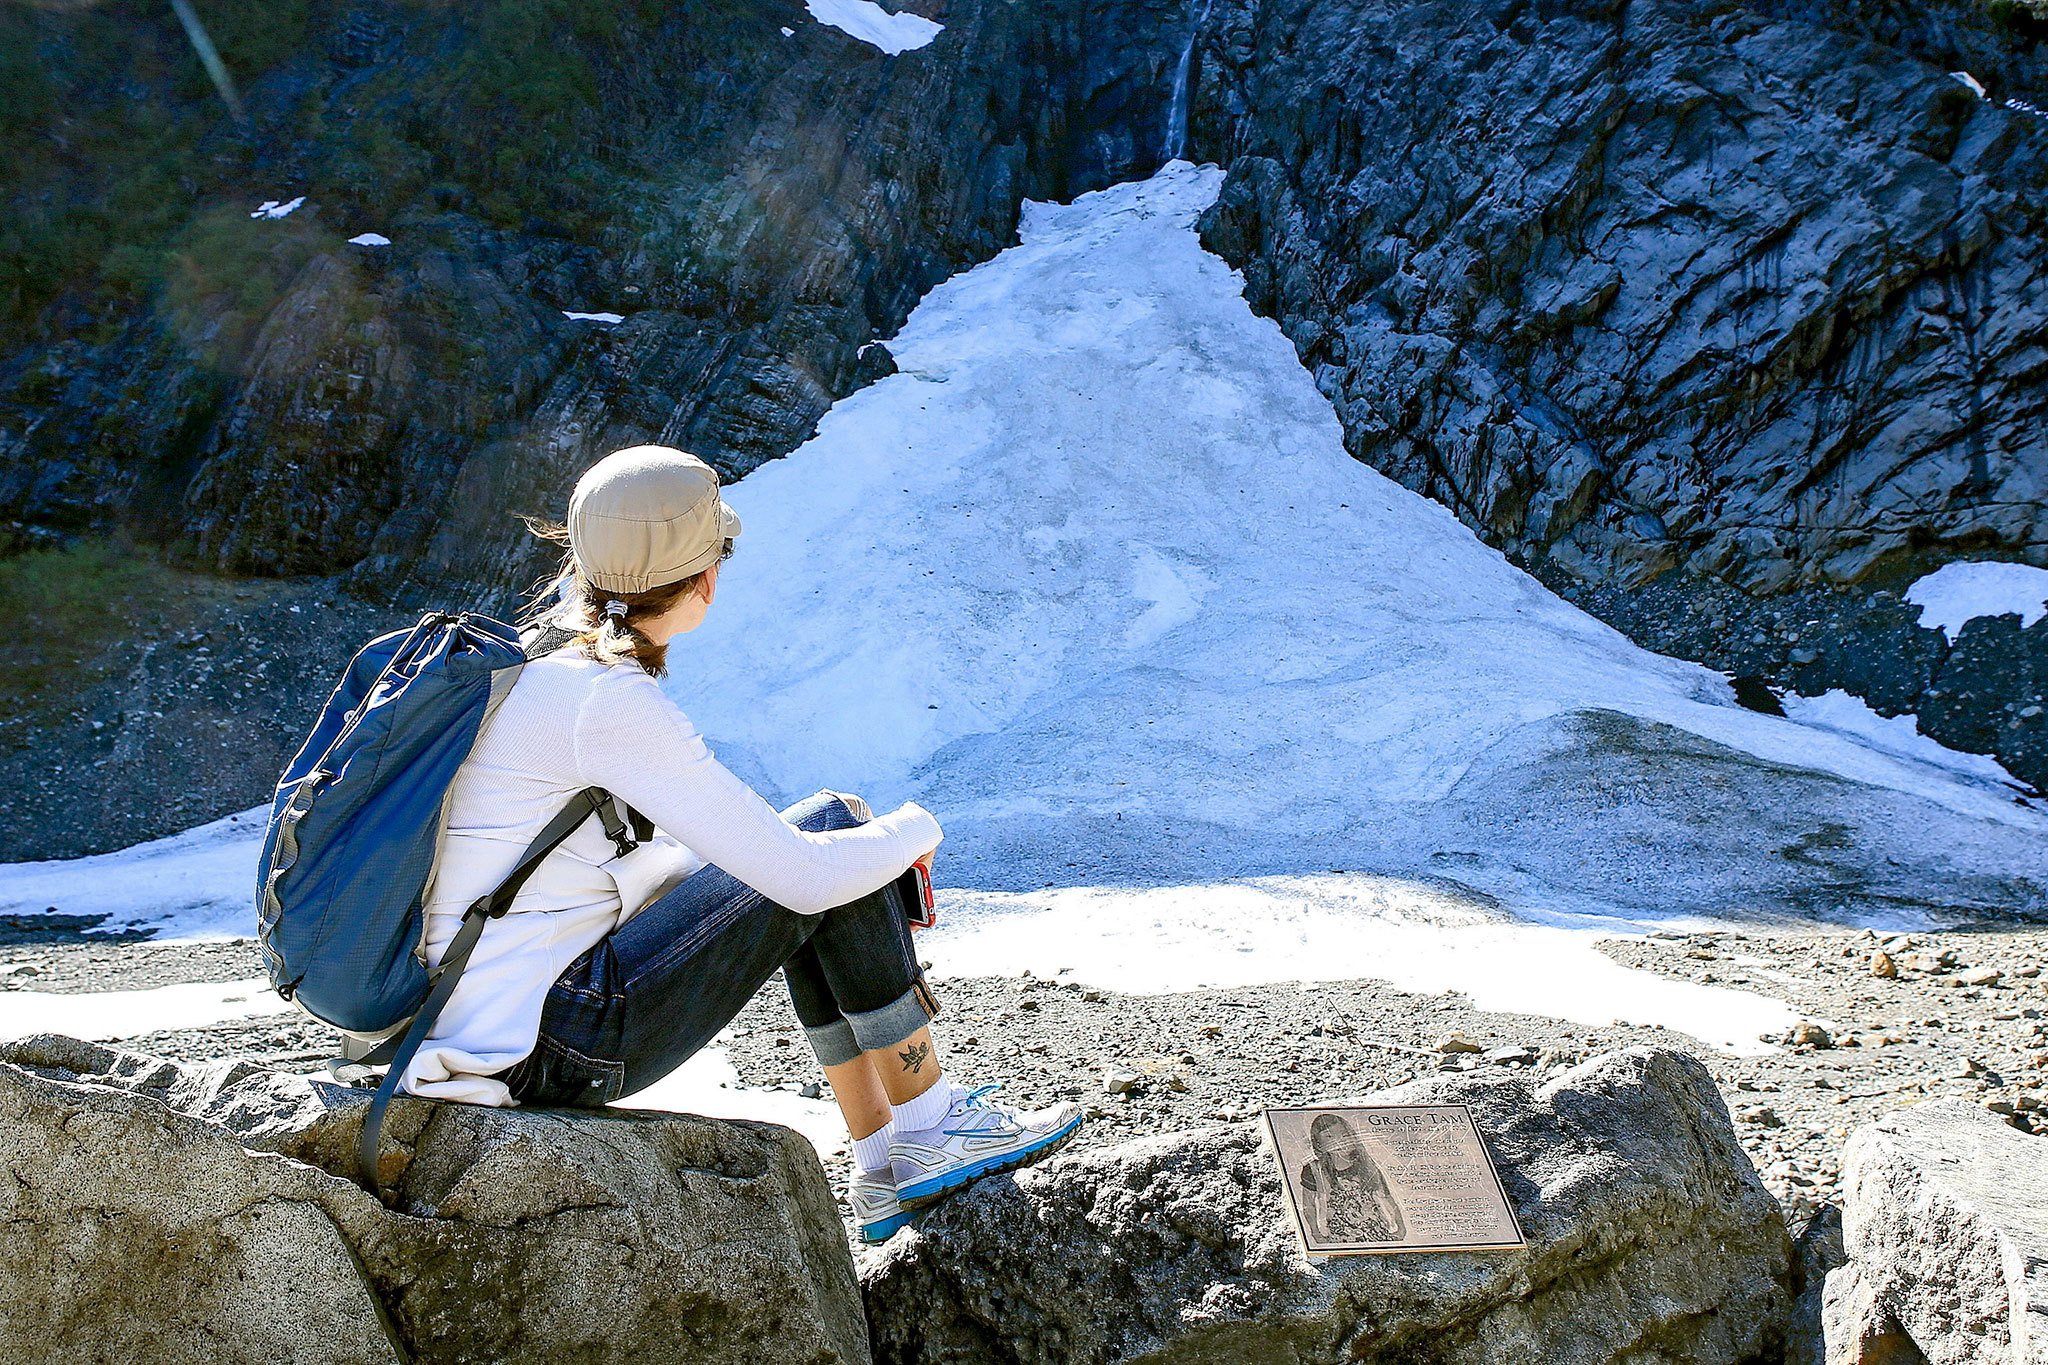 Connie Peterson looks out at the snowpack at the Big Four Ice Caves in Granite Falls on May 1. At right is a memorial plaque to Grace Tam, 11, who died July 31, 2010, after she was struck by a piece of ice while visiting the site with her family. (Kevin Clark / The Daily Herald, file)